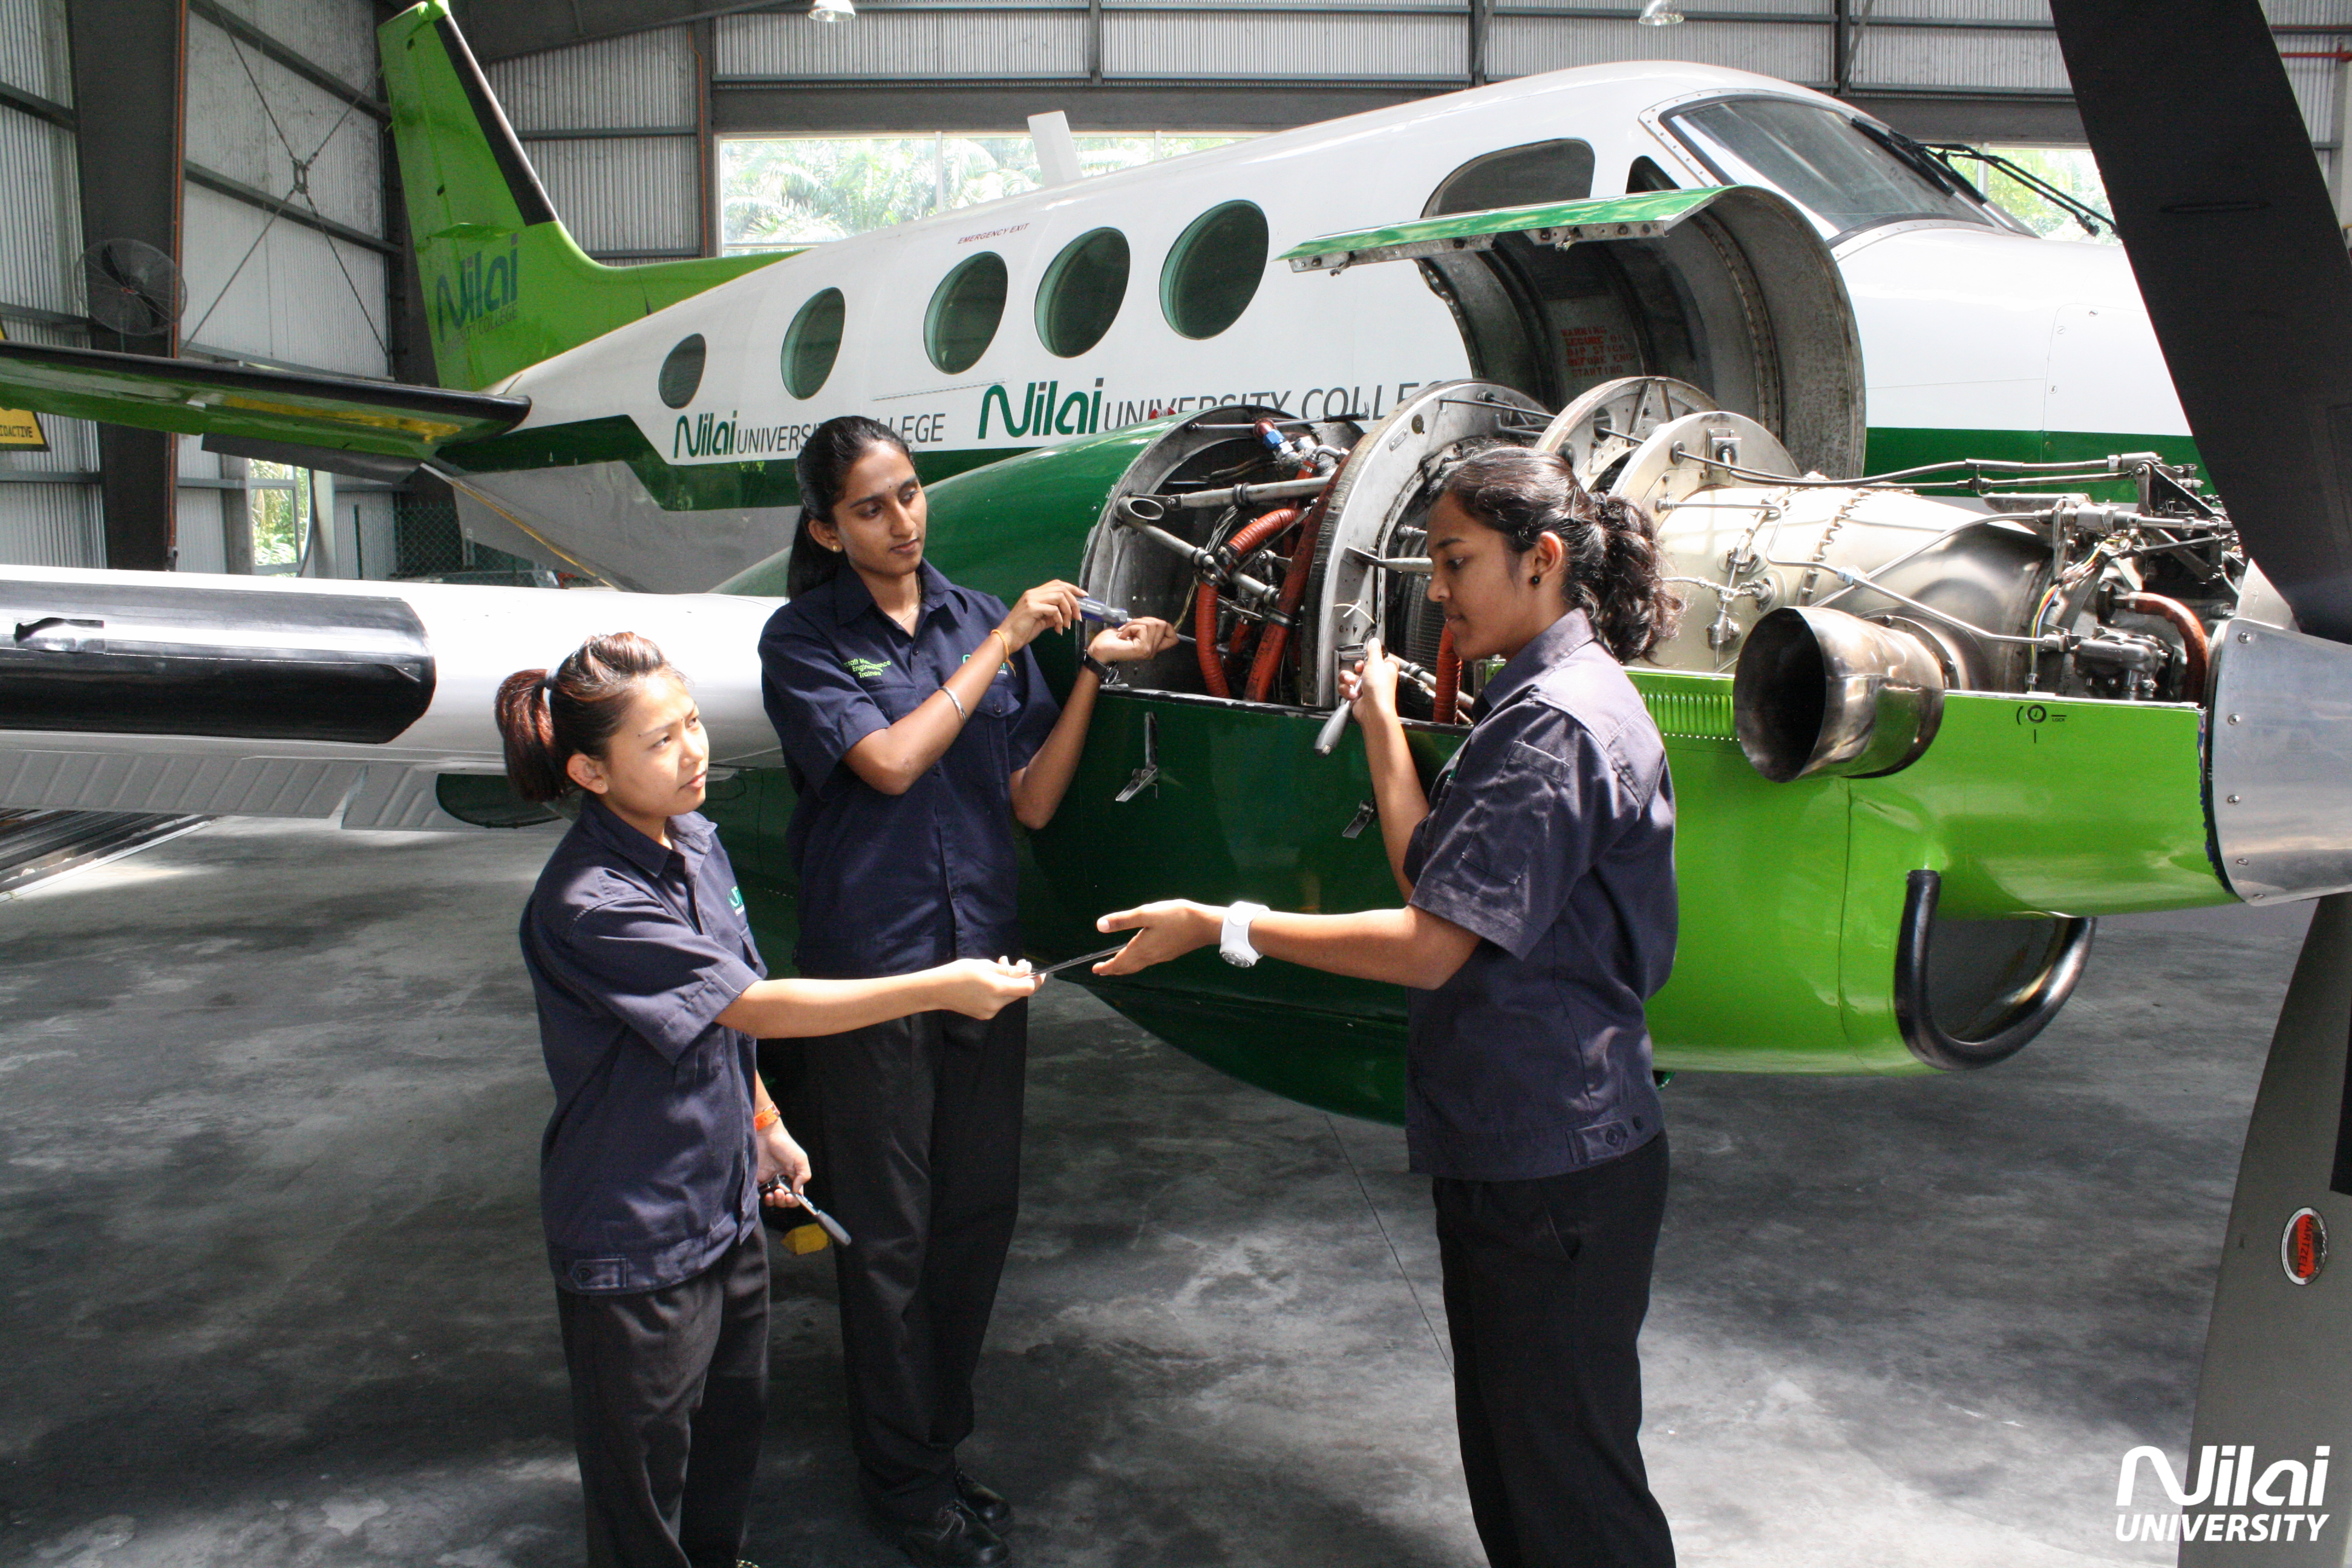 Diploma in Aircraft Maintenance students at Nilai University learn and practice on actual planes in the hangar on the university's campus.